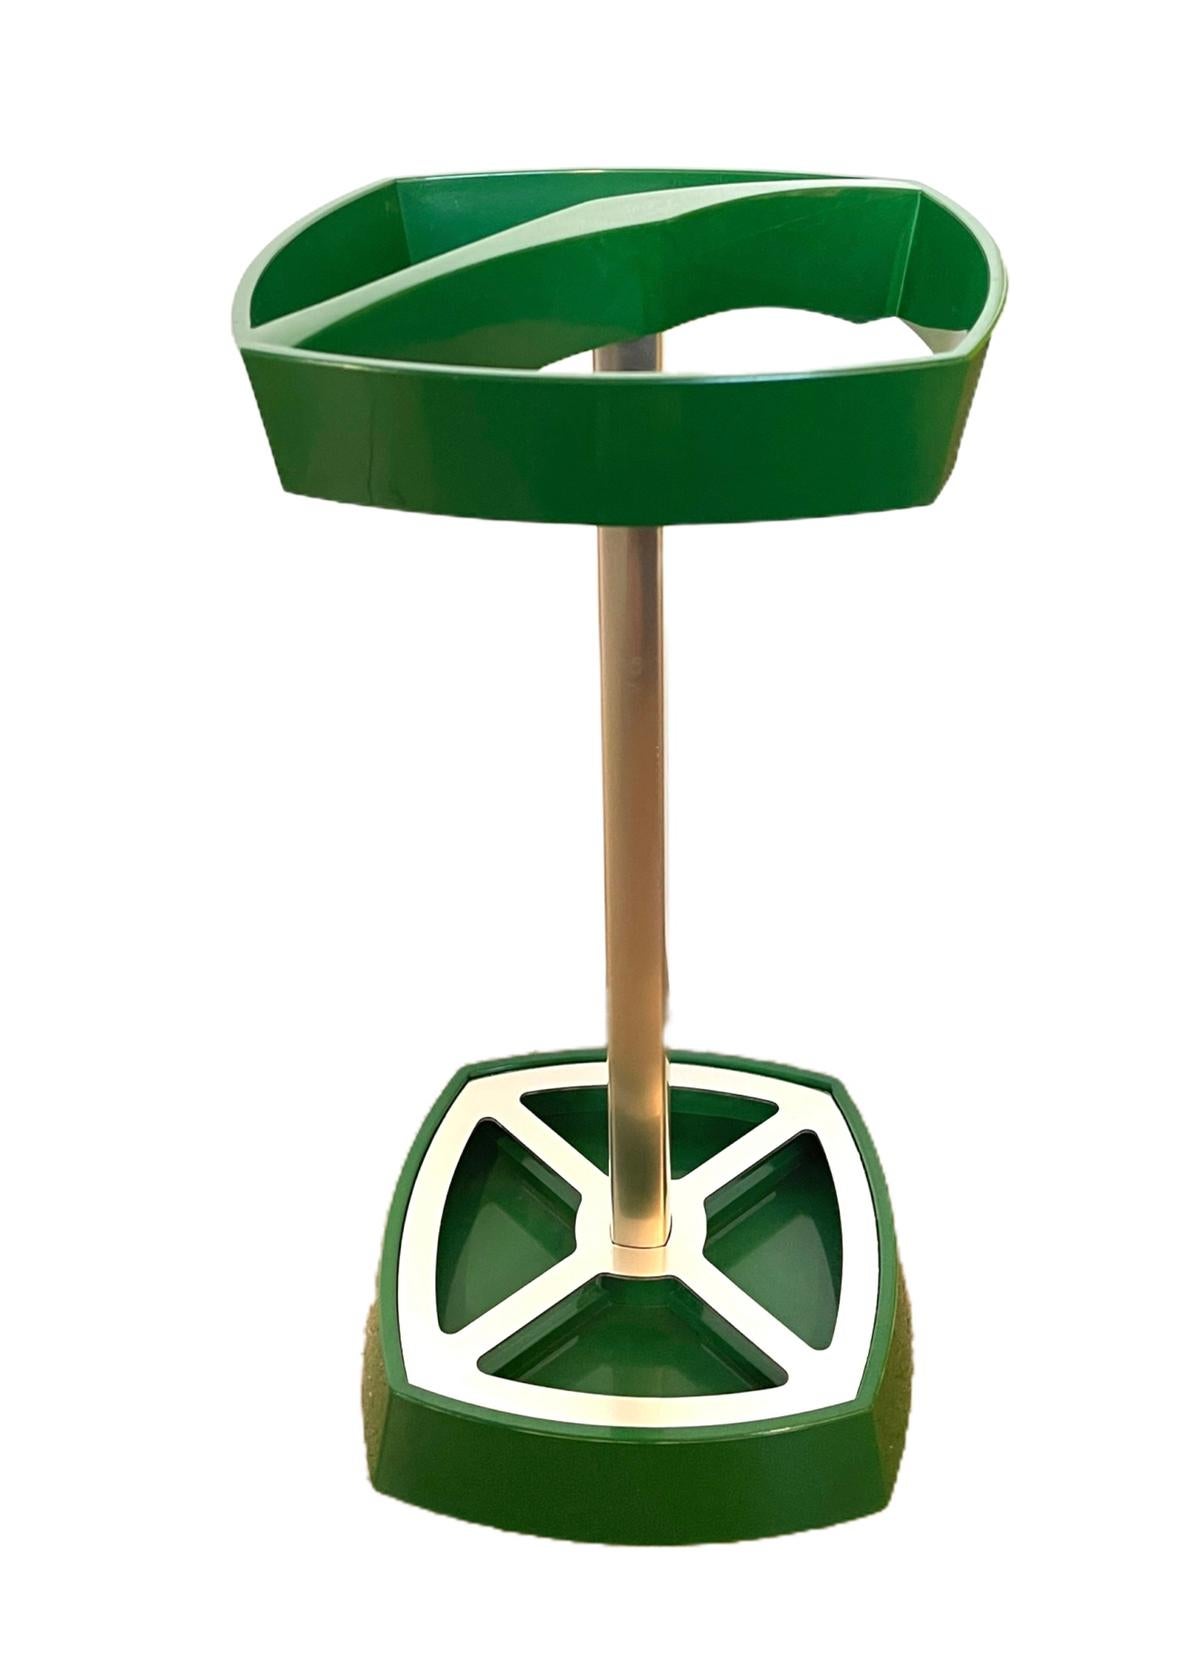 This space age green vintage umbrella stand was designed and made circa 1970. The umbrella stand features angular, futuristic details. Very good condition with some signs of age.